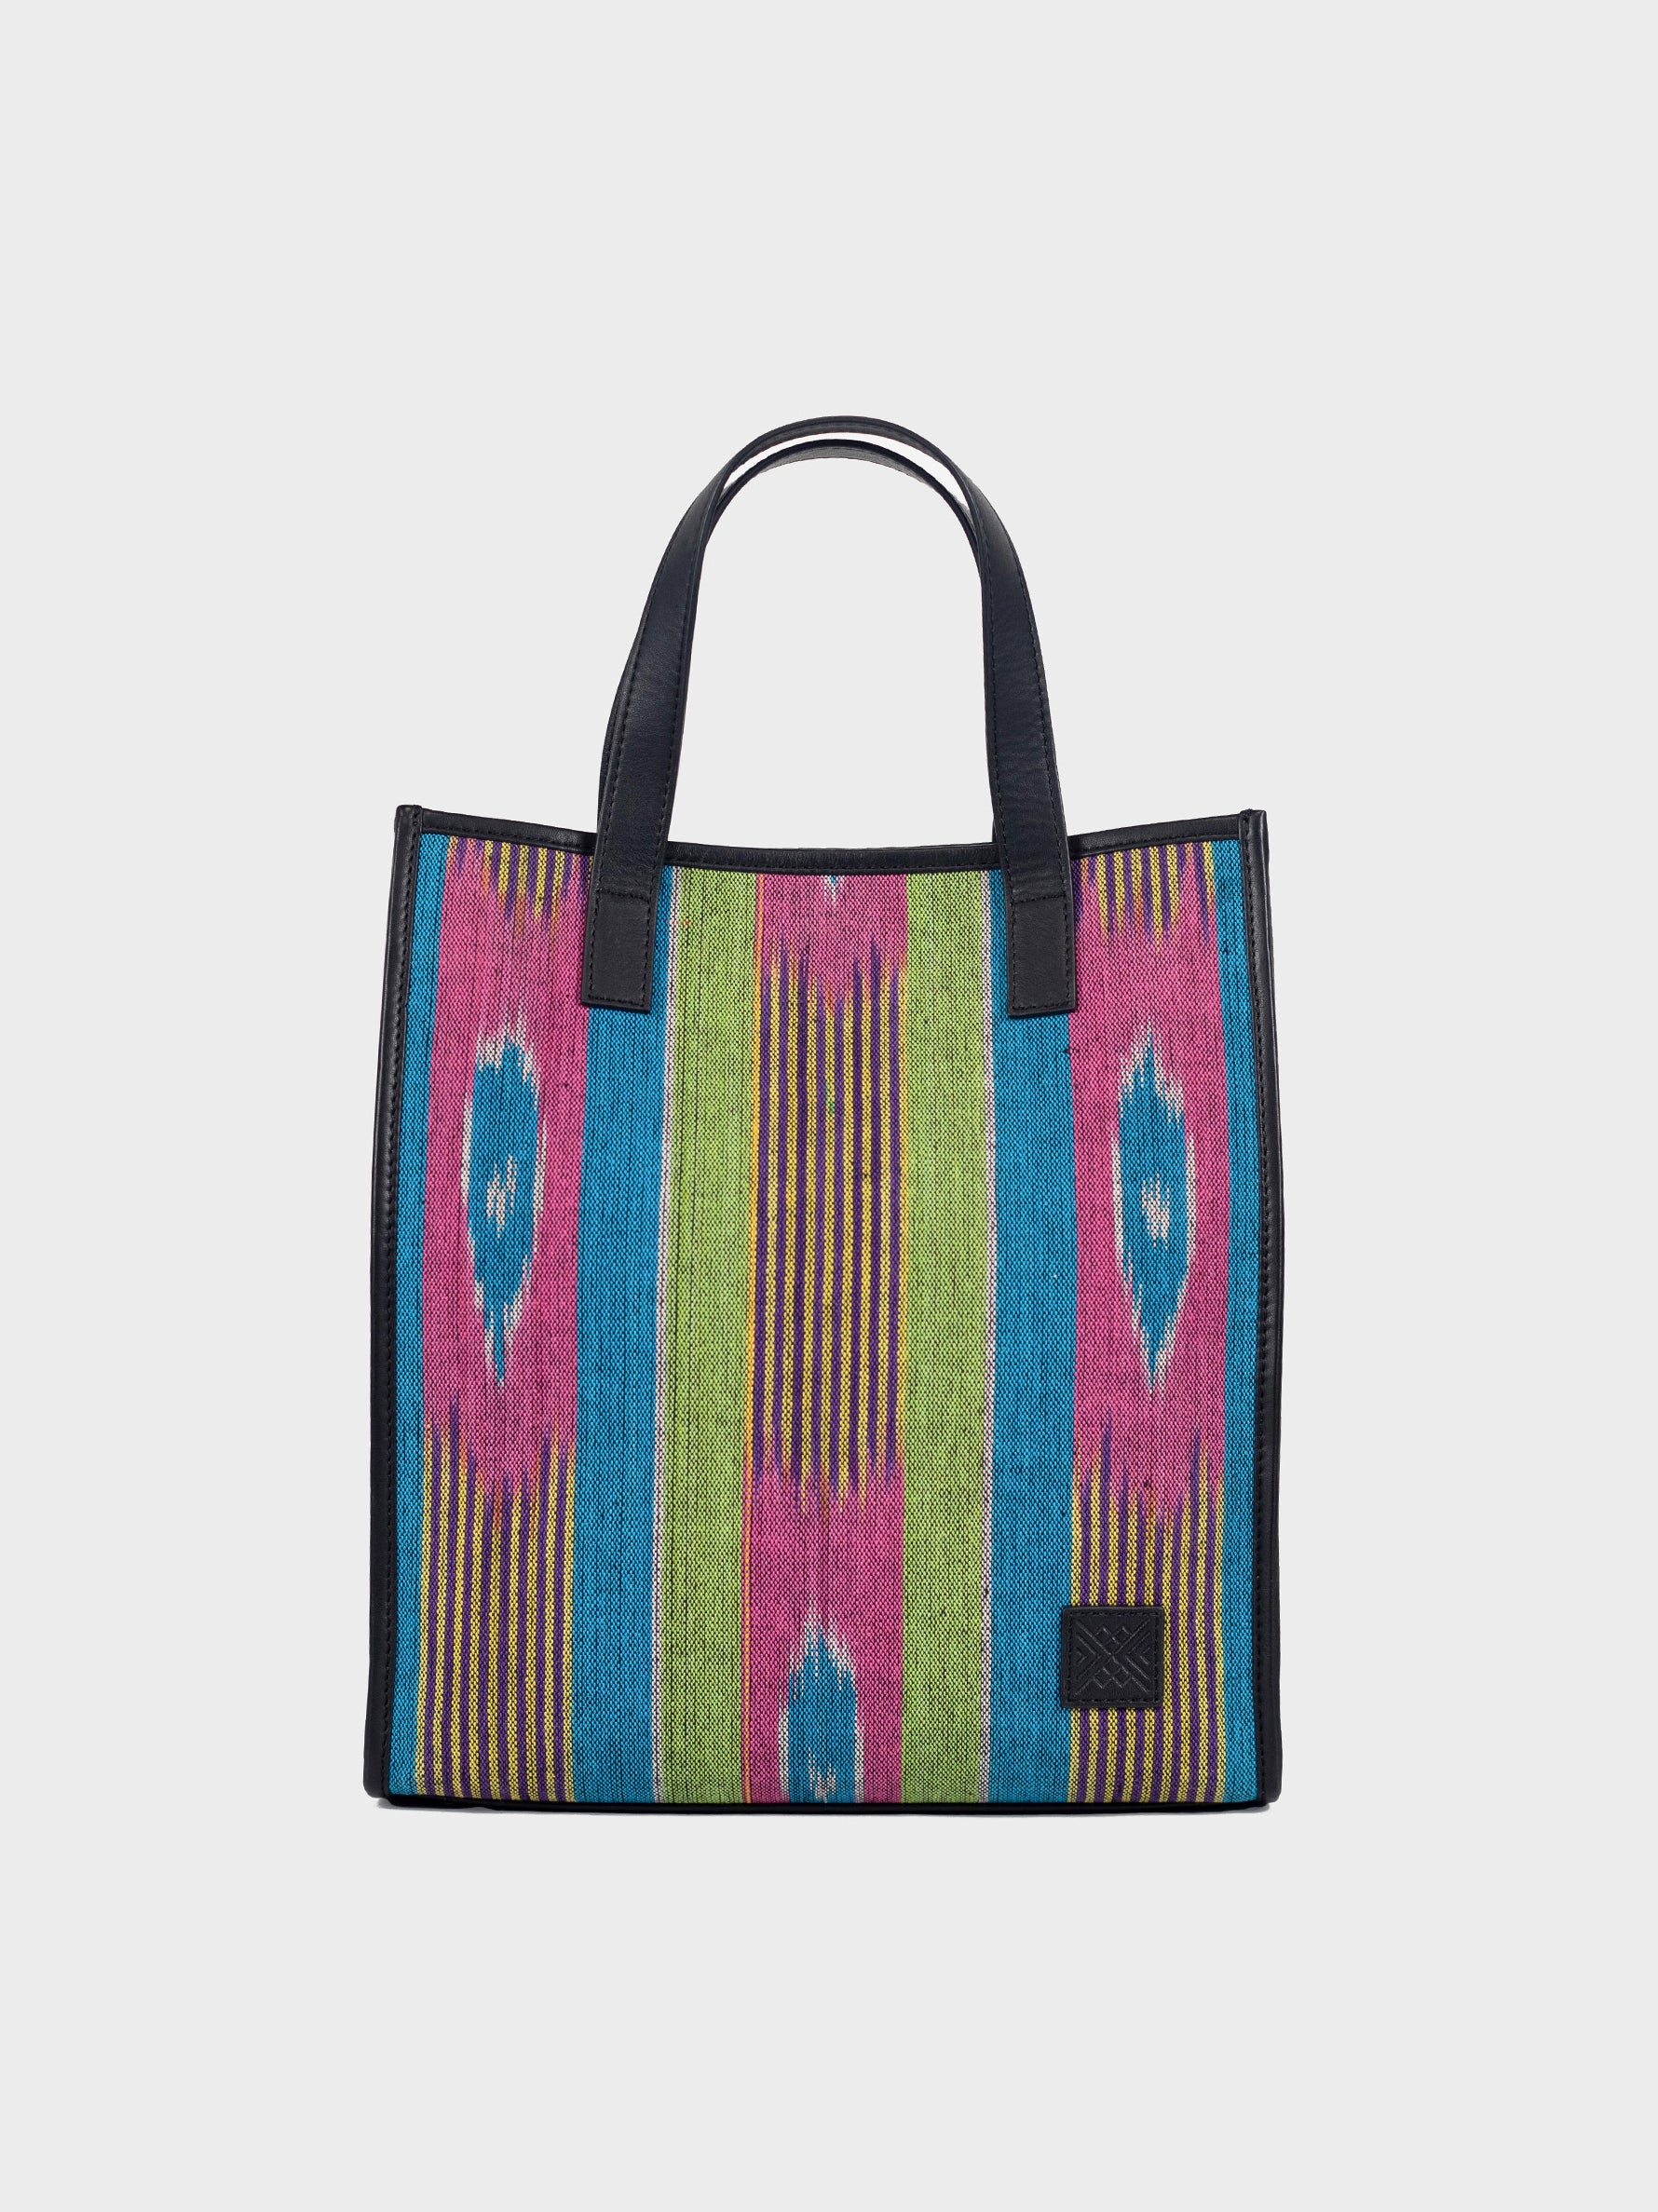 Handcrafted Genuine Leather & Colourfull Ikat Market Women's Tote Bag Tan & Loom